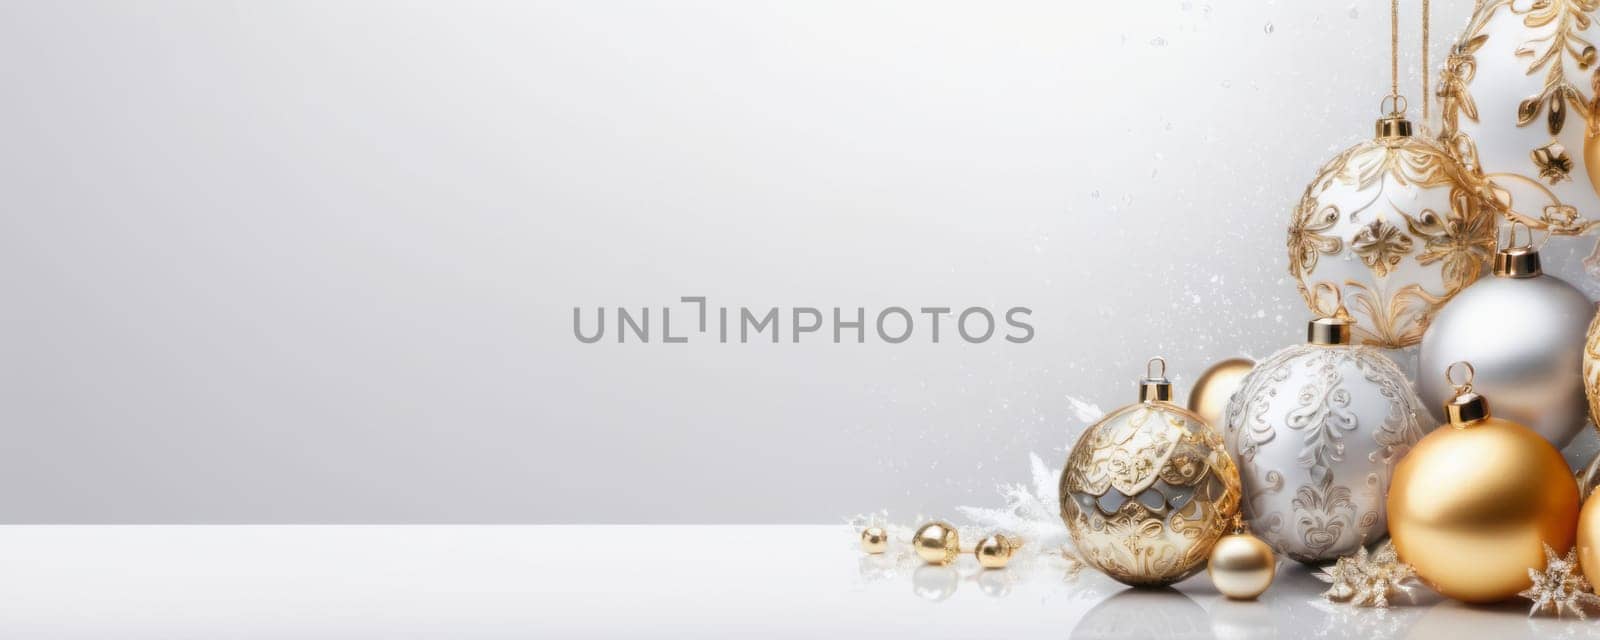 Luxurious Christmas Ornaments Display in Gold, Silver, and White by nkotlyar